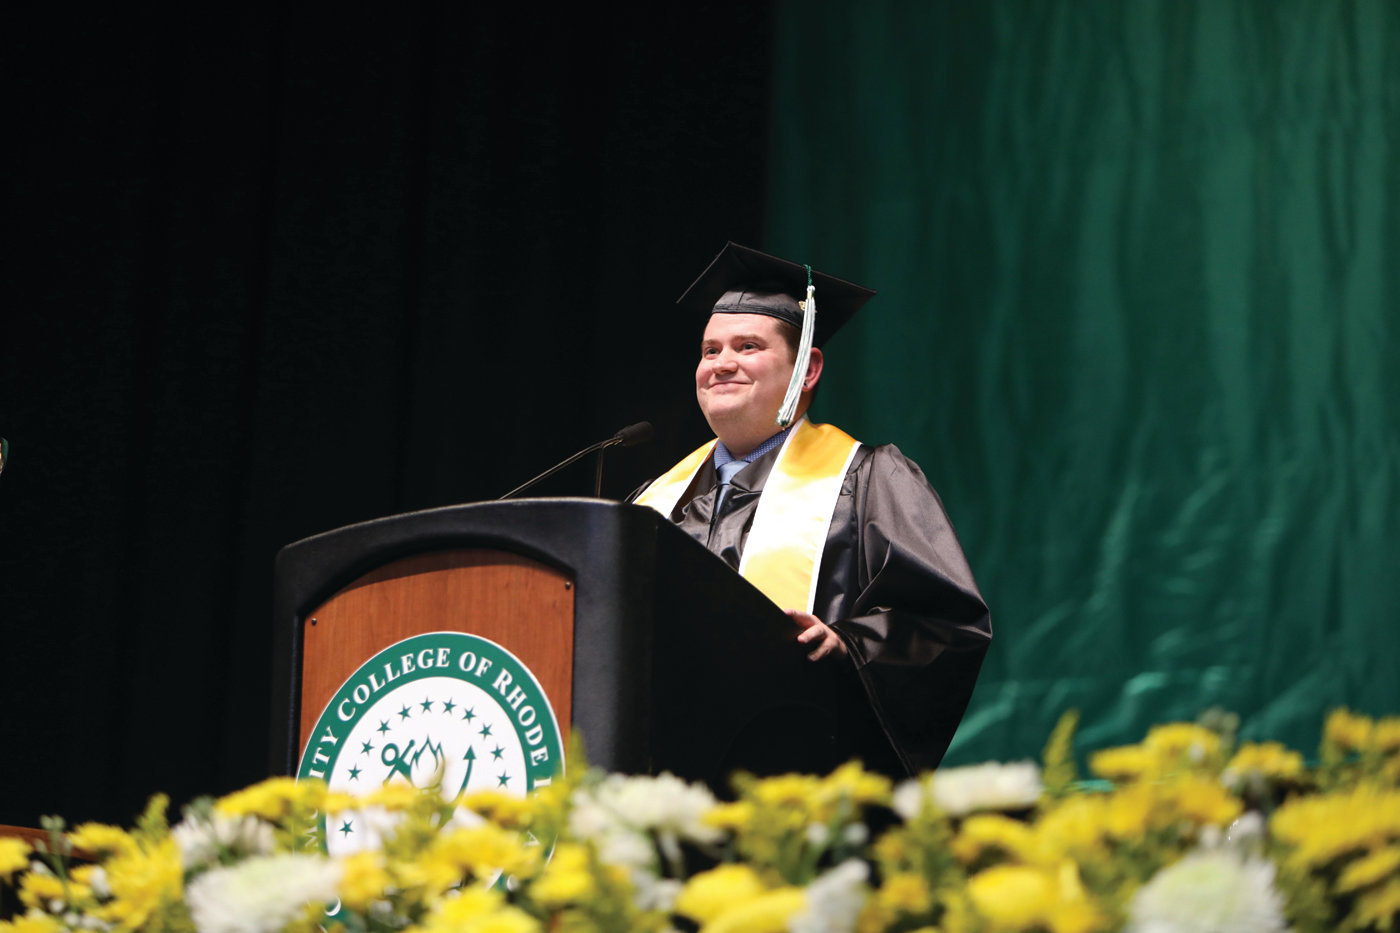 SUCCESS STORY: Michael Wynn, this year’s commencement speaker for CCRI, spoke about growing up in the state’s foster care system. “It is with the help of my community and CCRI that I have a plan for my future,” he said.